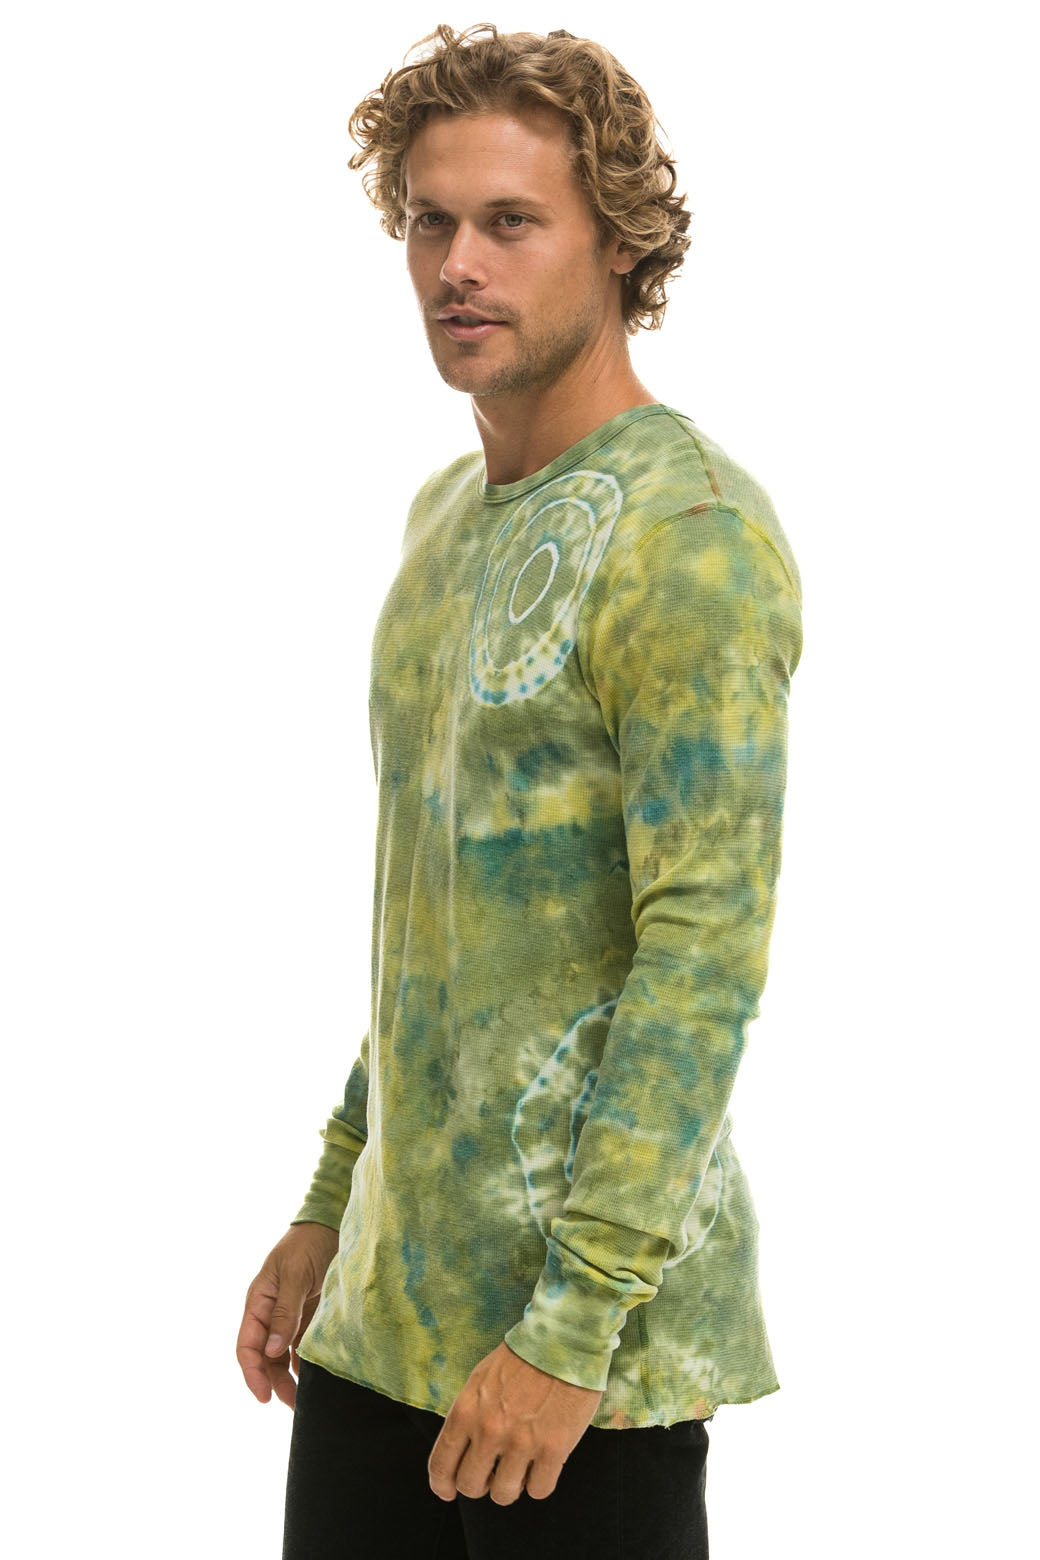 HAND DYED THERMAL - TIE DYE GREEN YELLOW Thermal Aviator Nation 